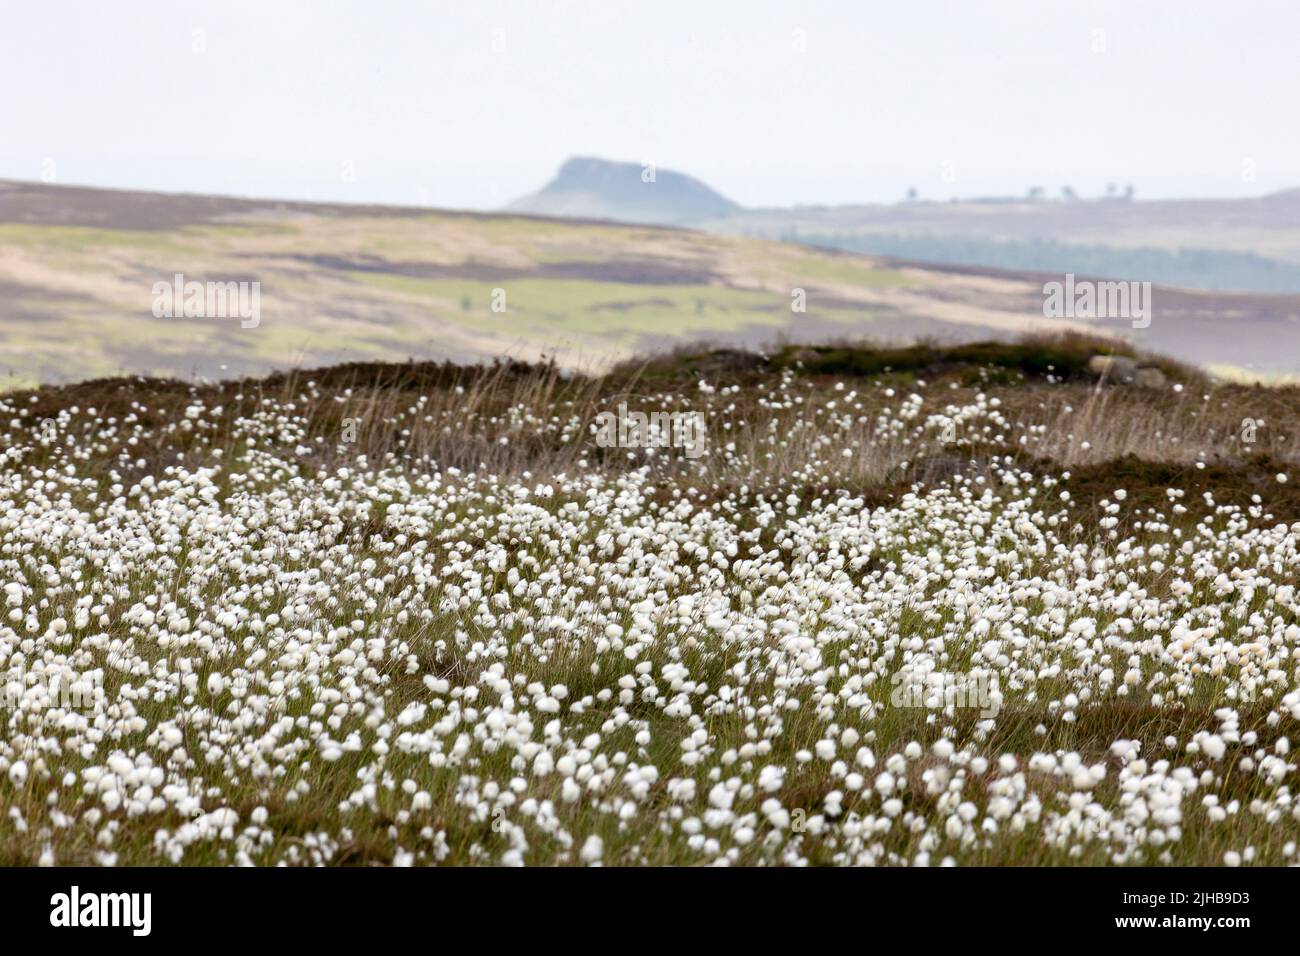 Estate cottongrass, Westerdale, North York Moors con Roseberry Topping in lontananza Foto Stock